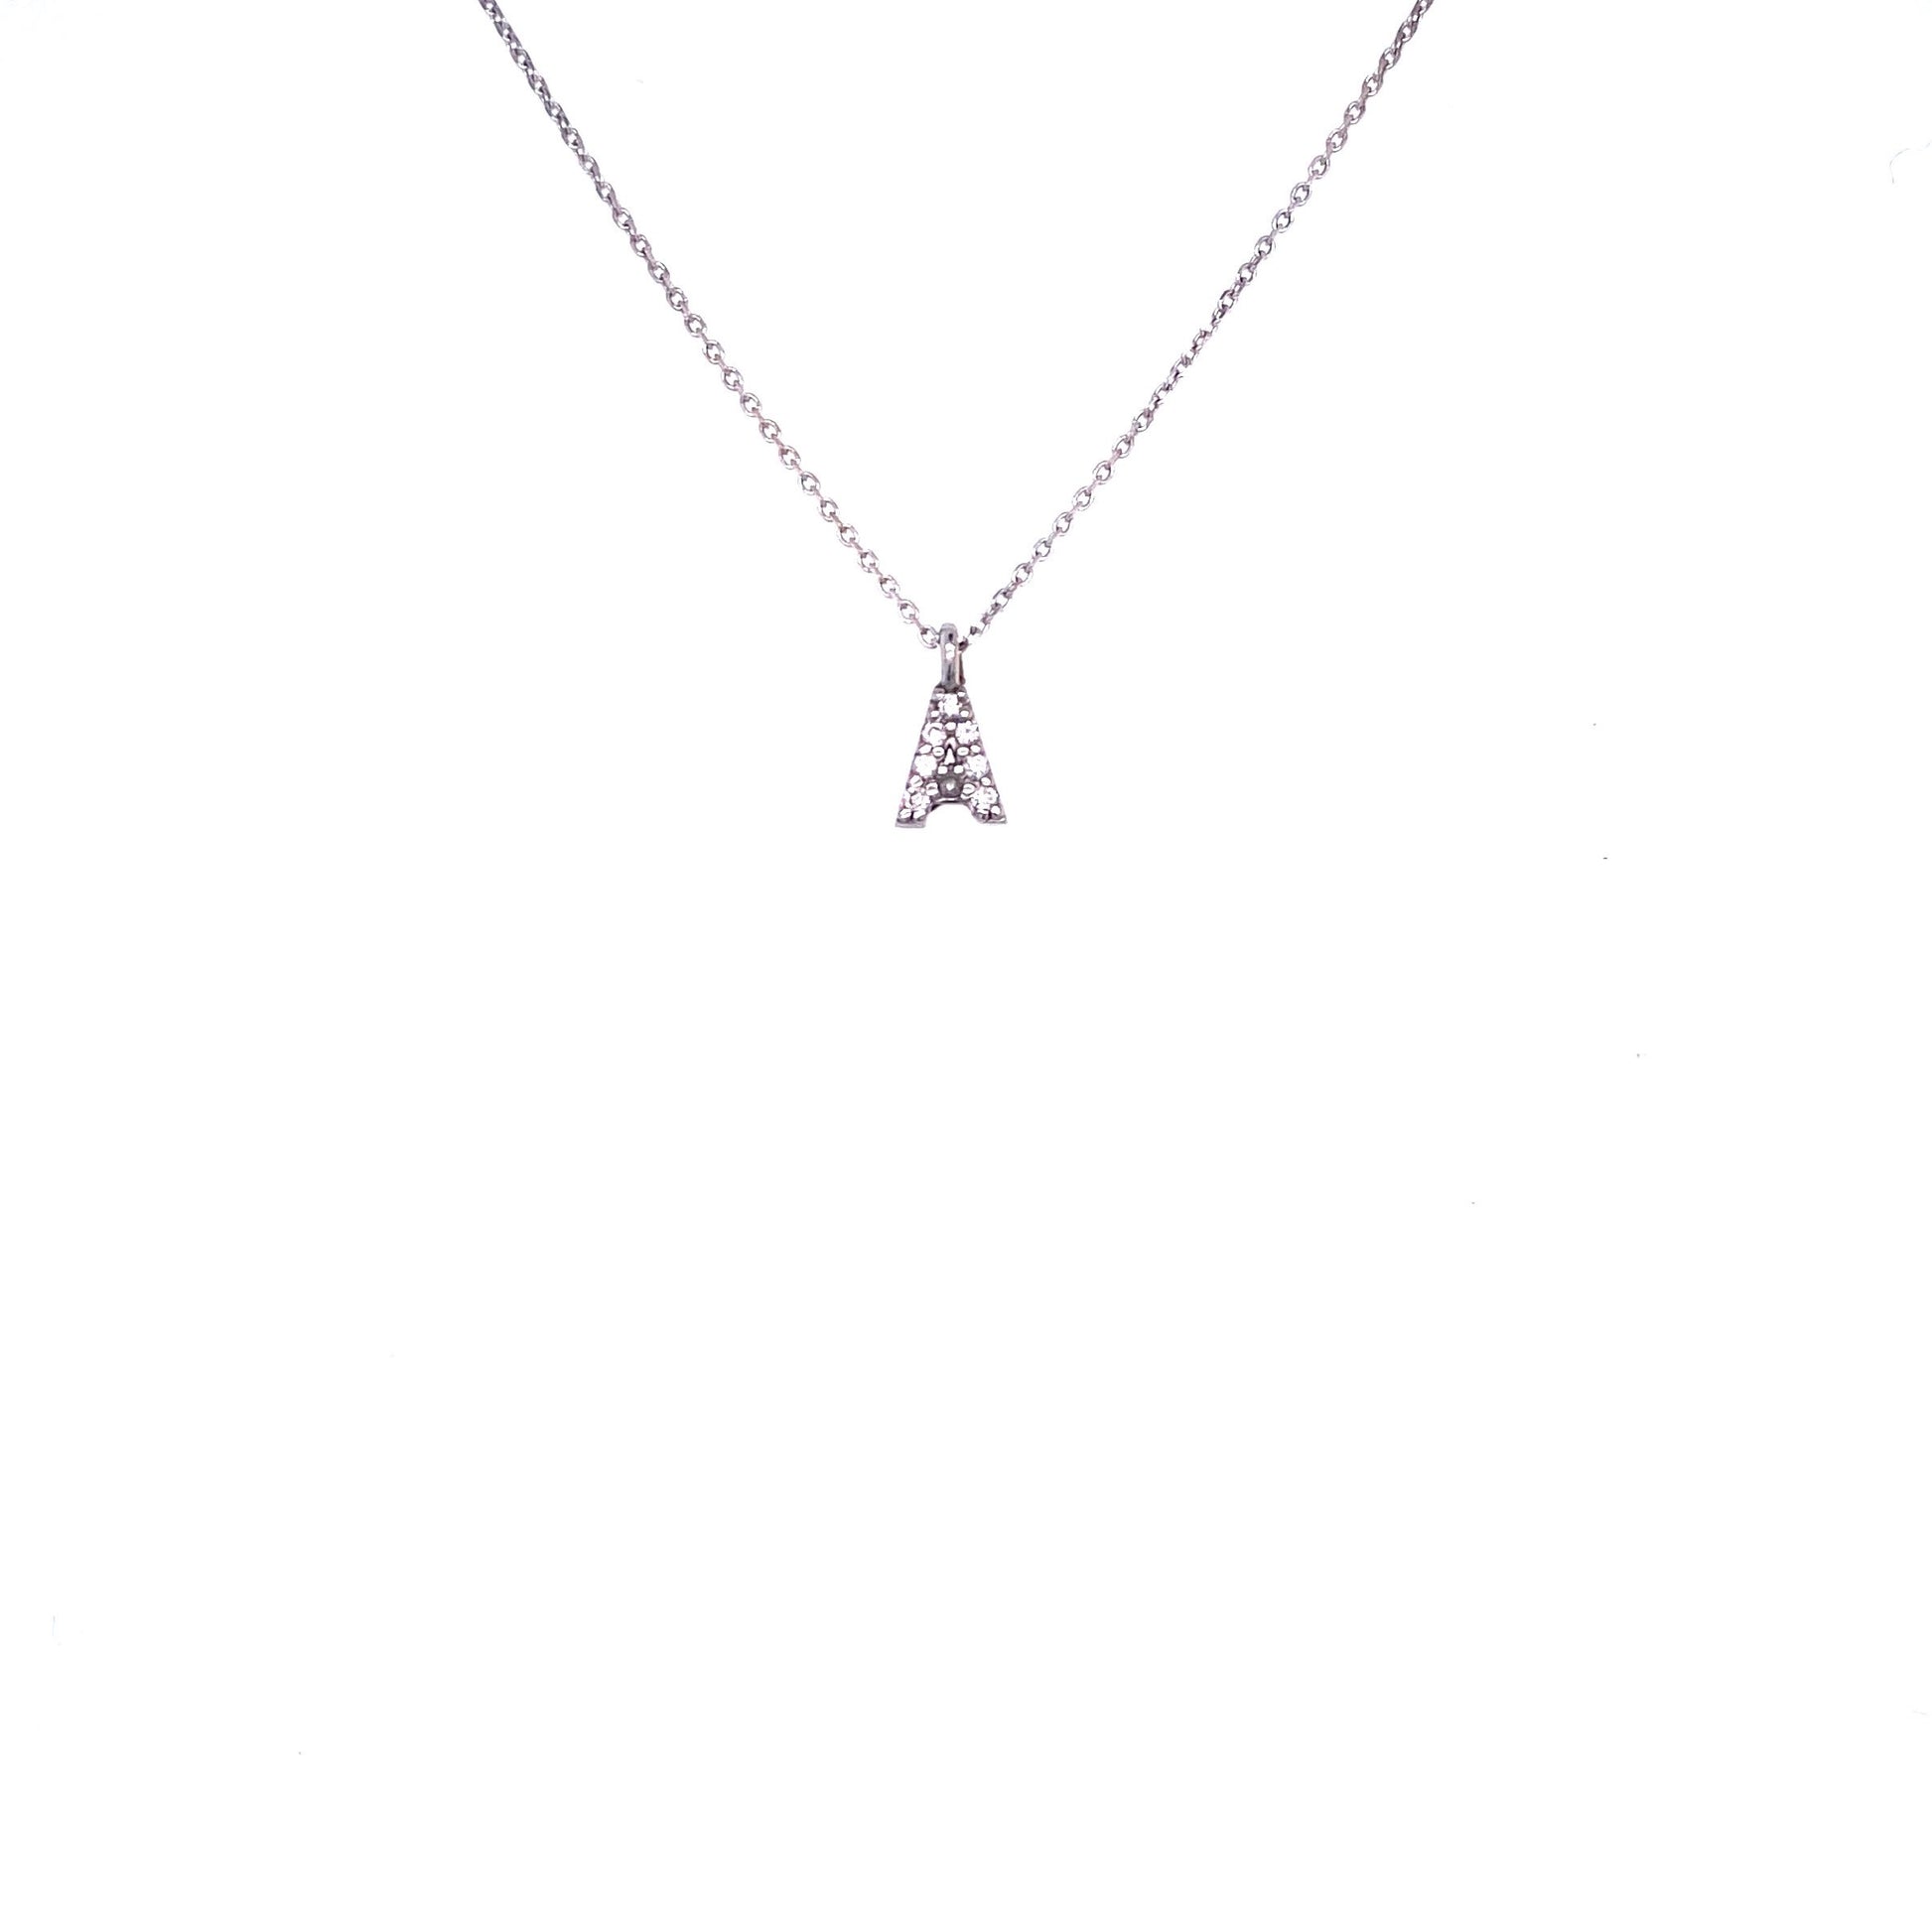 Necklace With Small Initial A and Diamond | Bernat Rubi | Luby 